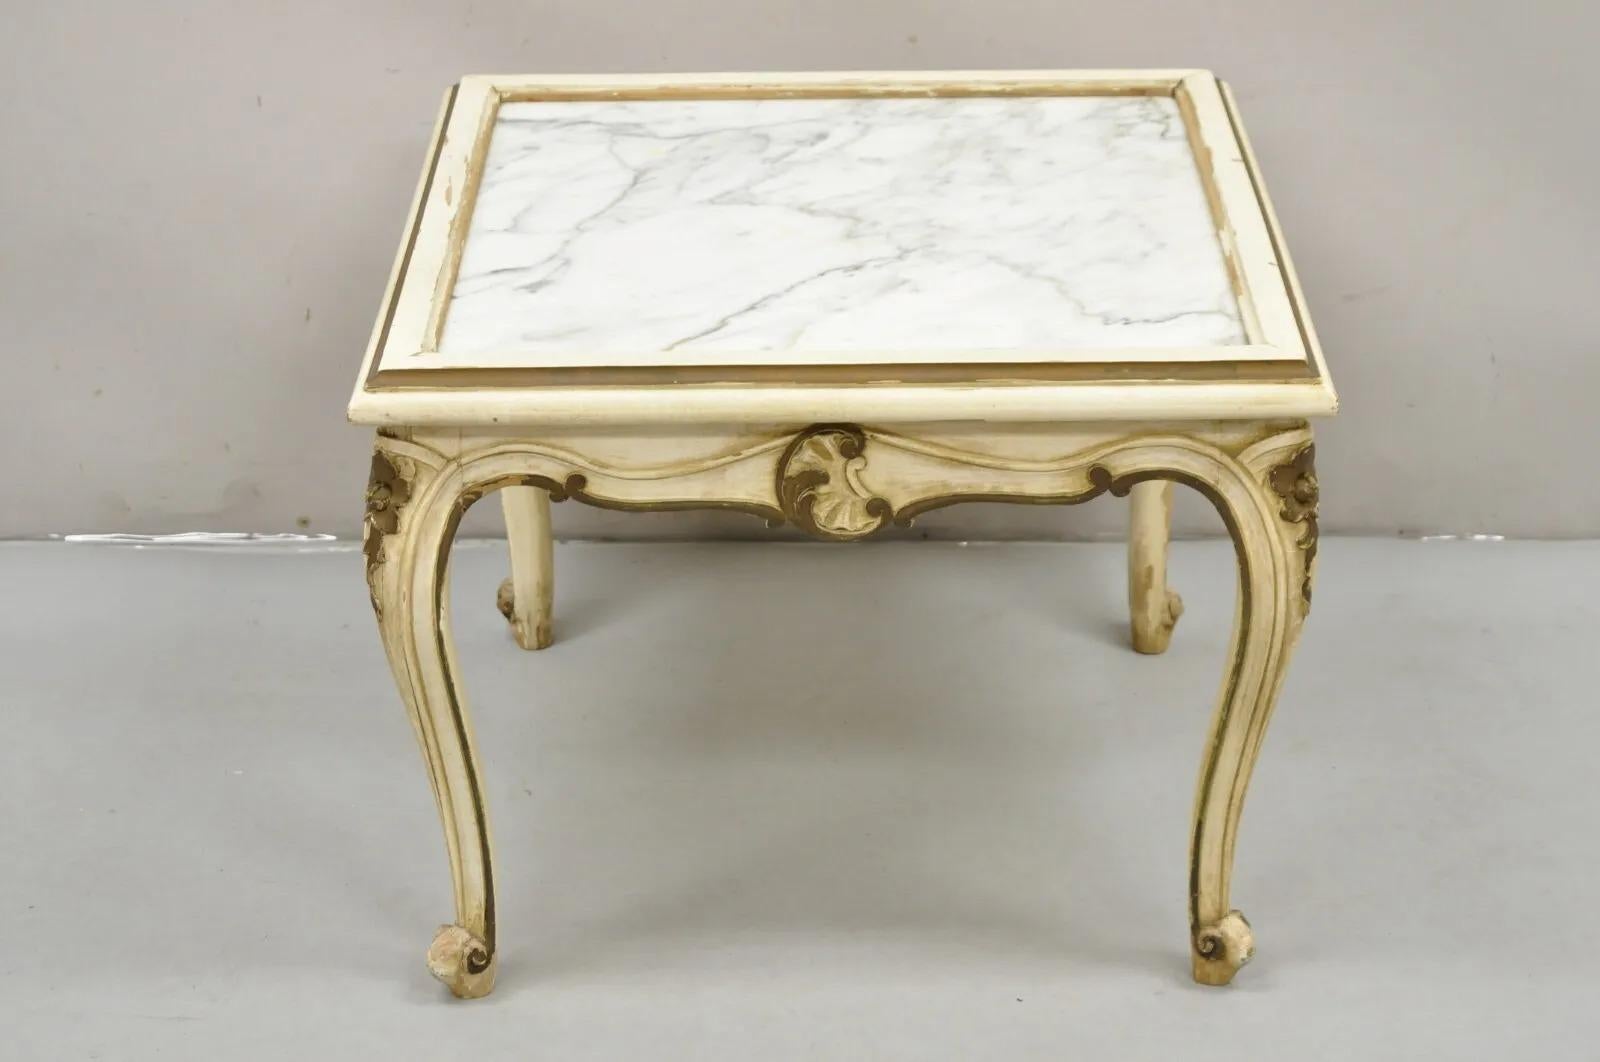 Vintage French Louis XV Style White Painted Marble Top Small Square Coffee Table. Item features white and dark gold paint distressed finish, marble top, shapely legs, very nice low vintage table. Circa Mid 20th Century. Measurements: 19